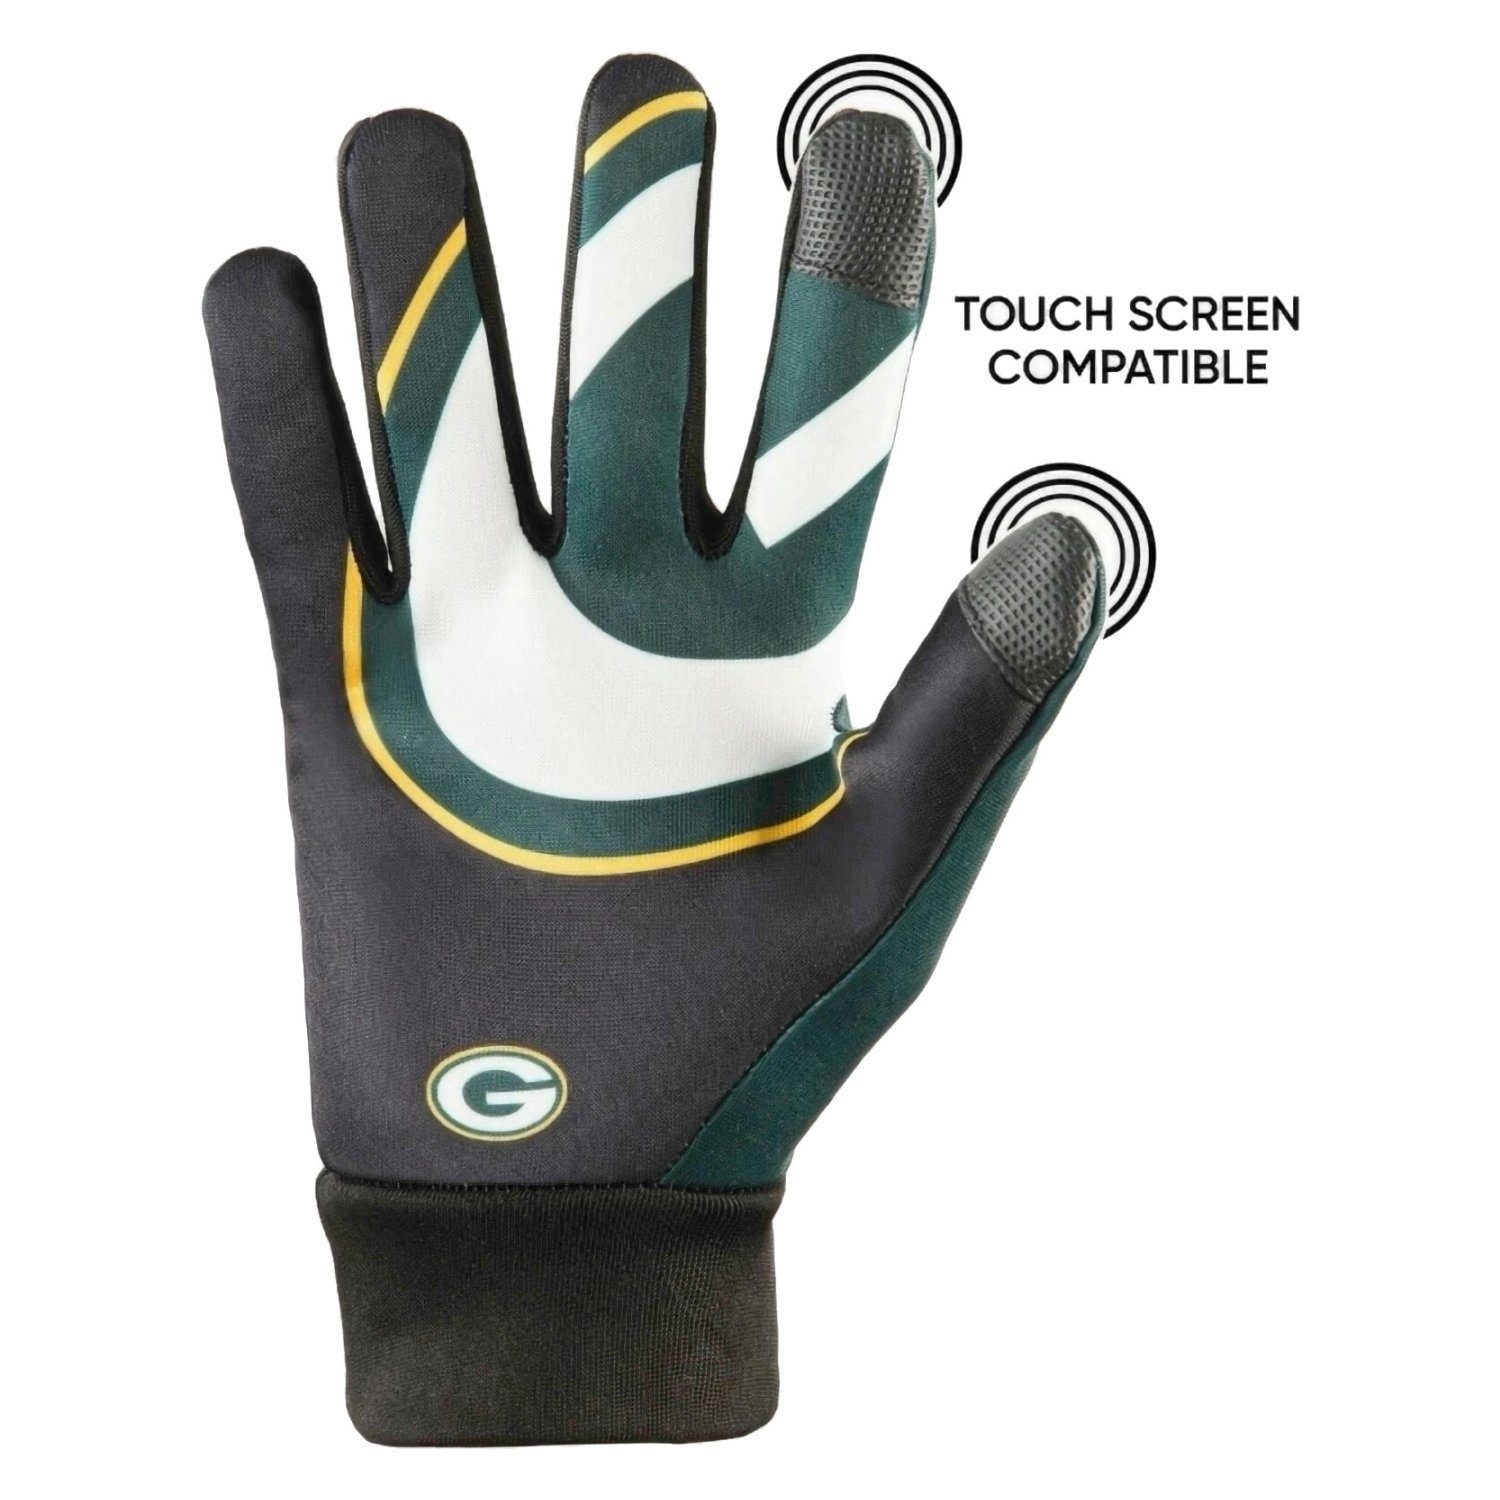 Multisporthandschuhe Handschuhe Collectibles LOGO Forever Bay Packers NFL Green